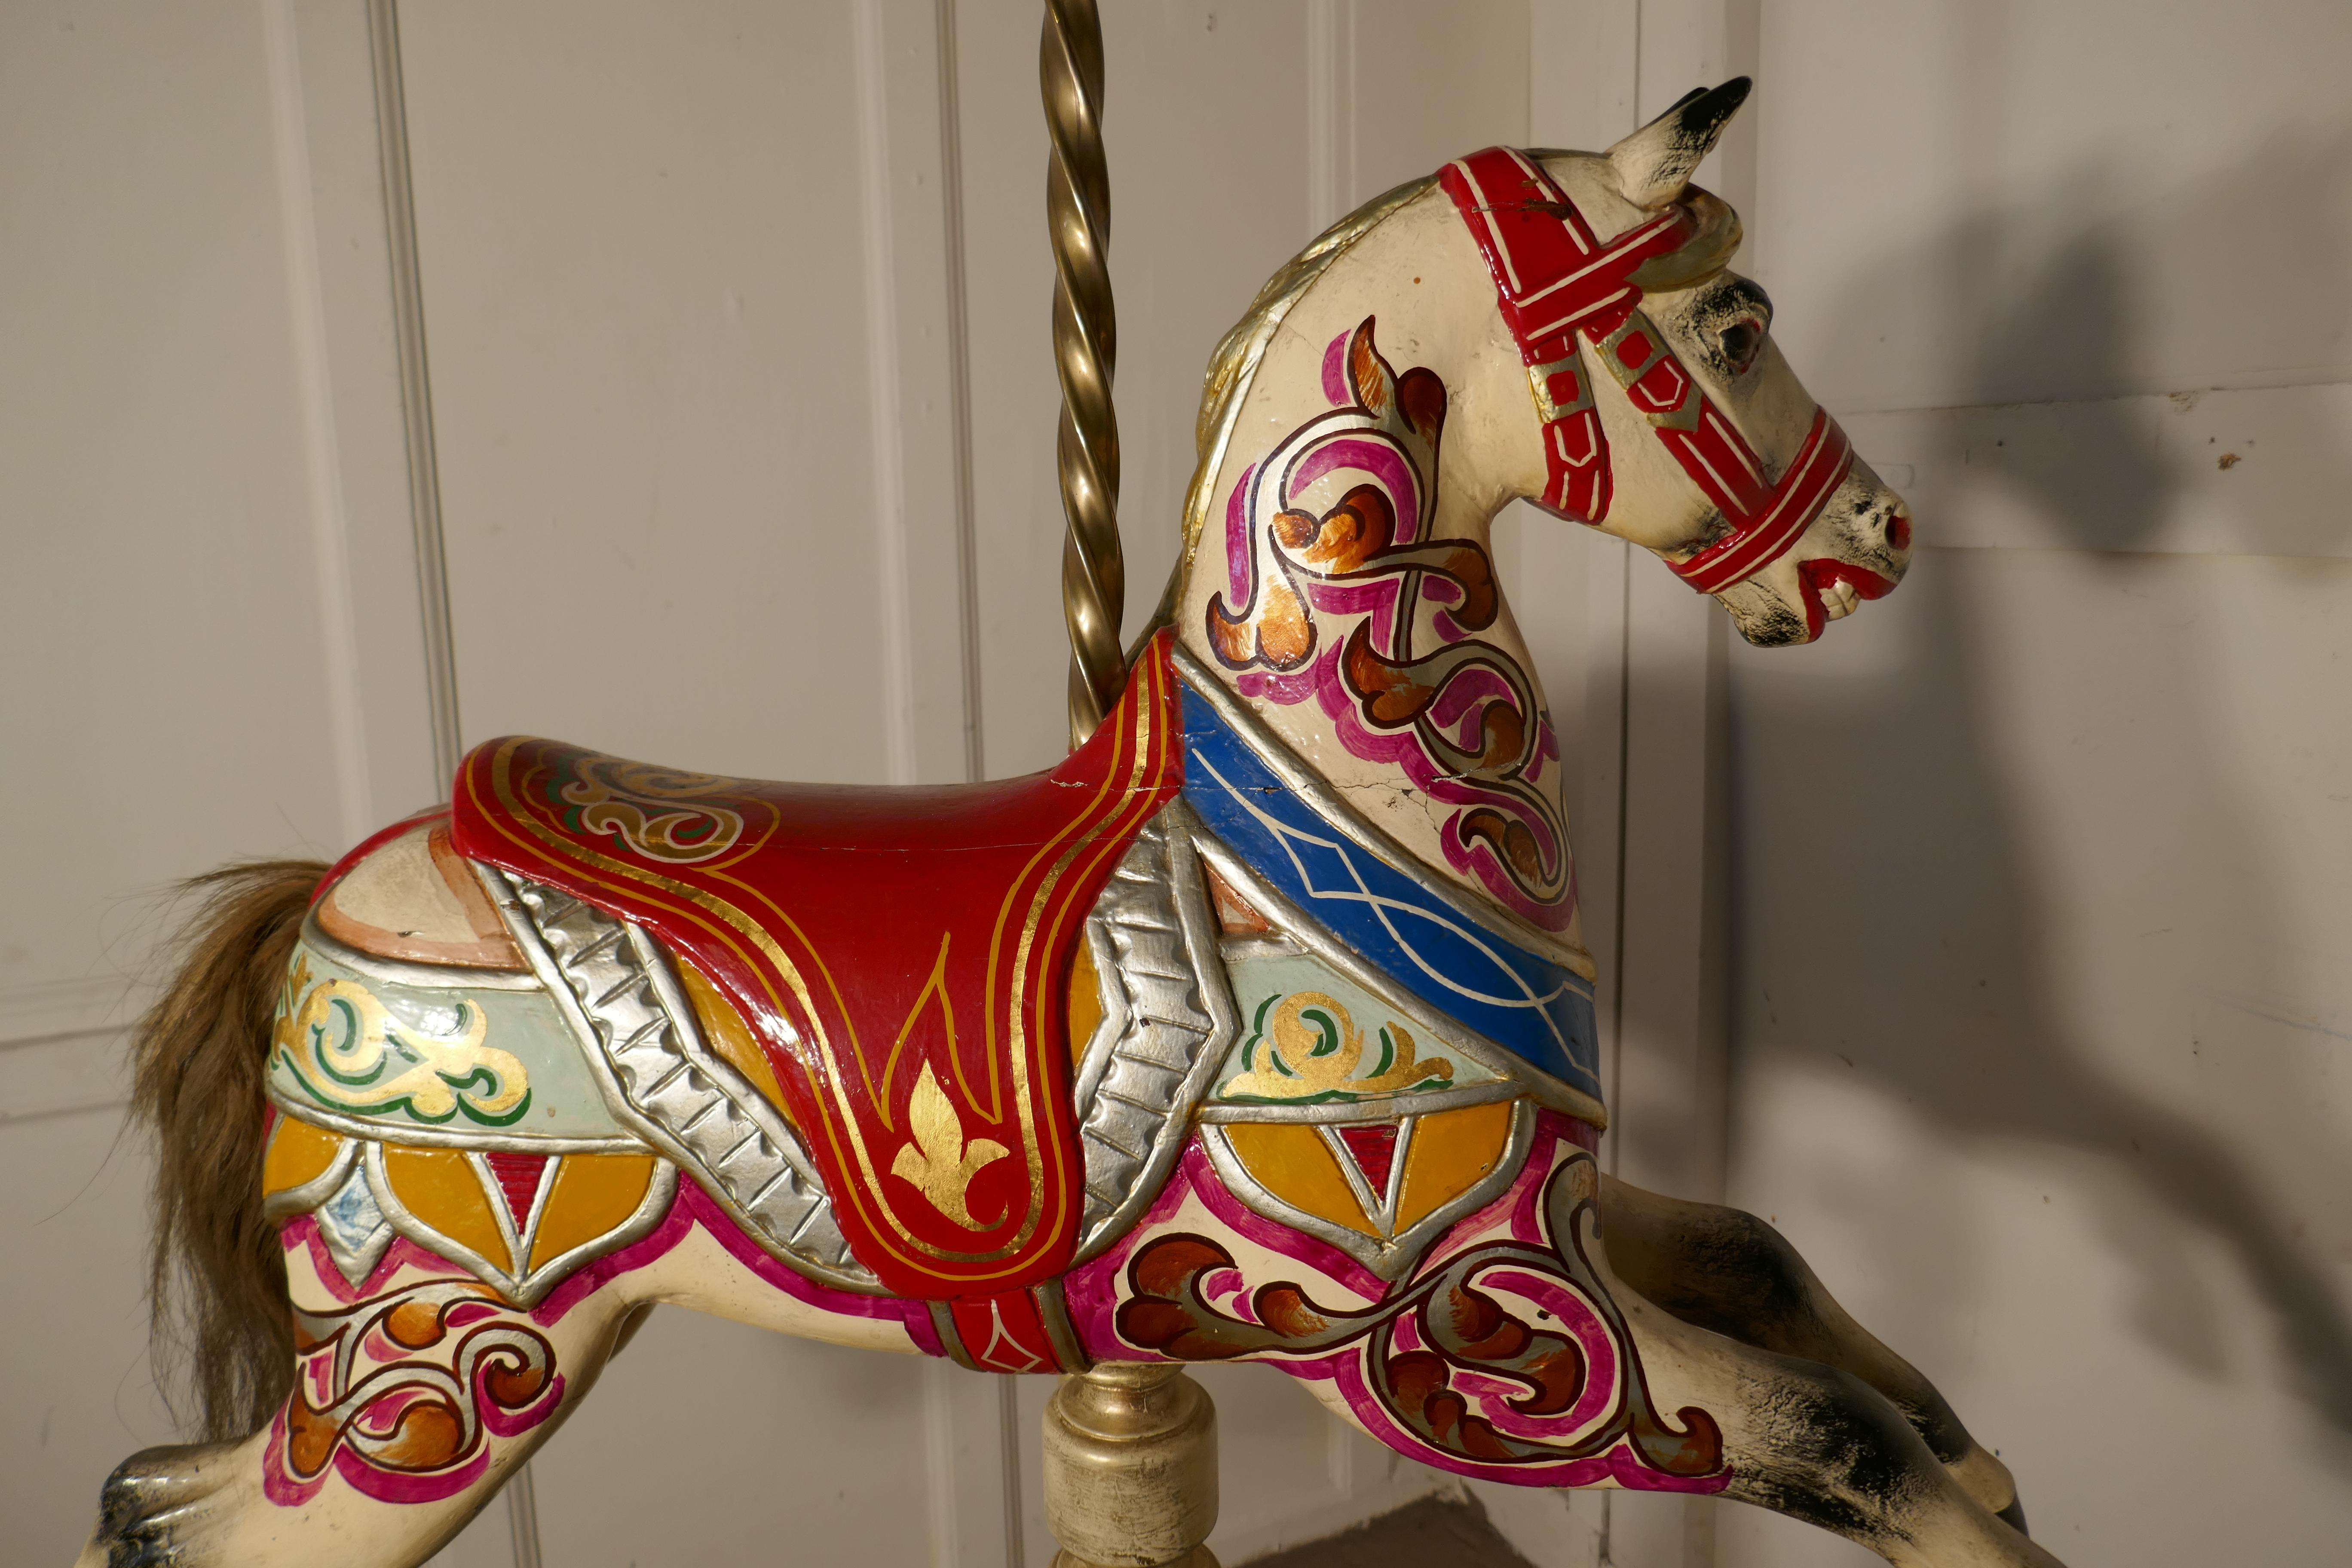 Small 19th century painted wooden carousel galloper or fair ground horse


An original the 19th century fair ground galloper, he has glass eyes and is made all in wood, the carnival paint is bright and seems to be the original design it is signed